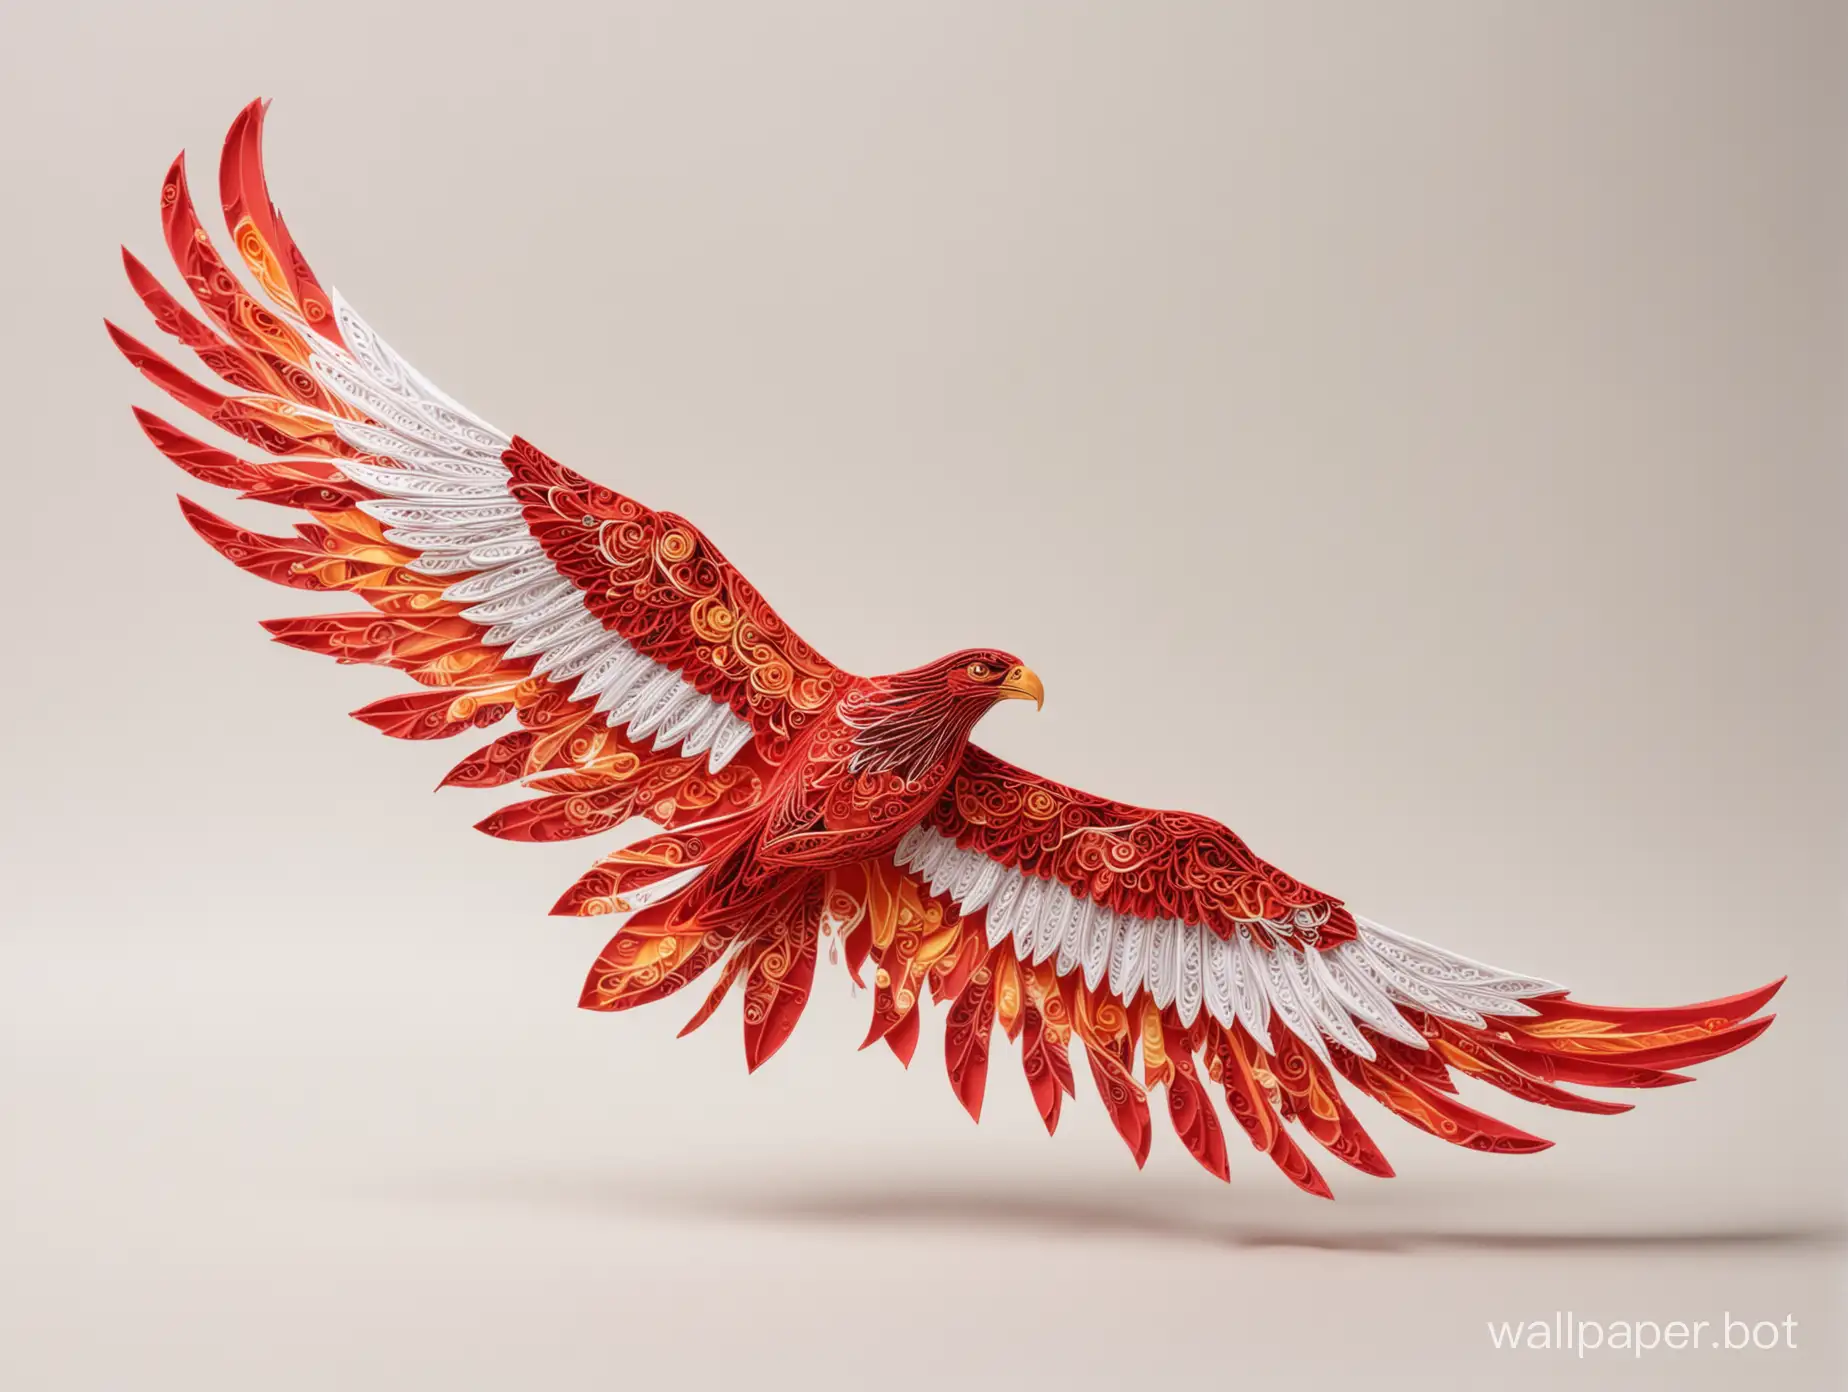 Red-Eagle-Papercraft-Quilling-Art-Majestic-Bird-with-Decorative-Flames